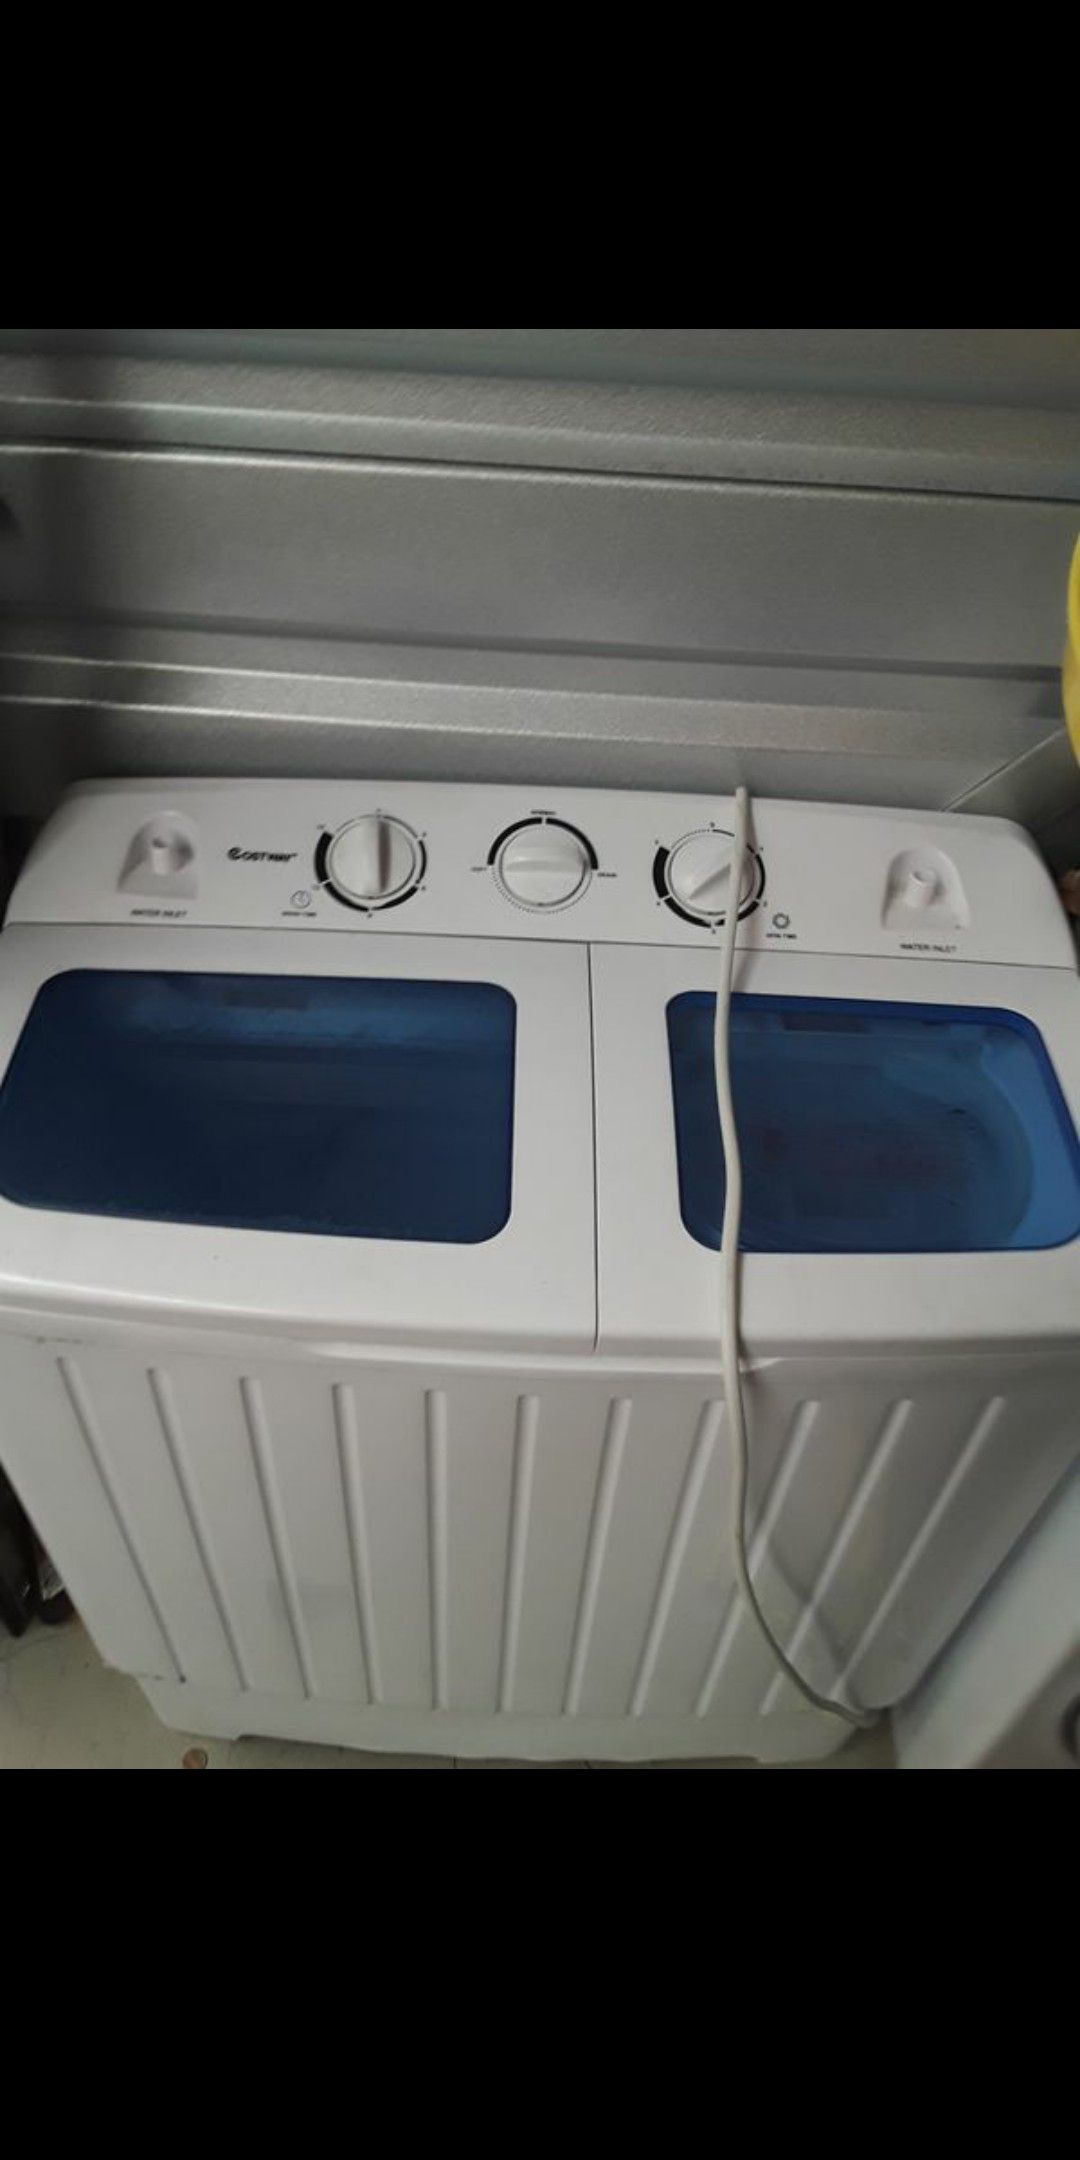 Mini RV 2in1 washer and dryer